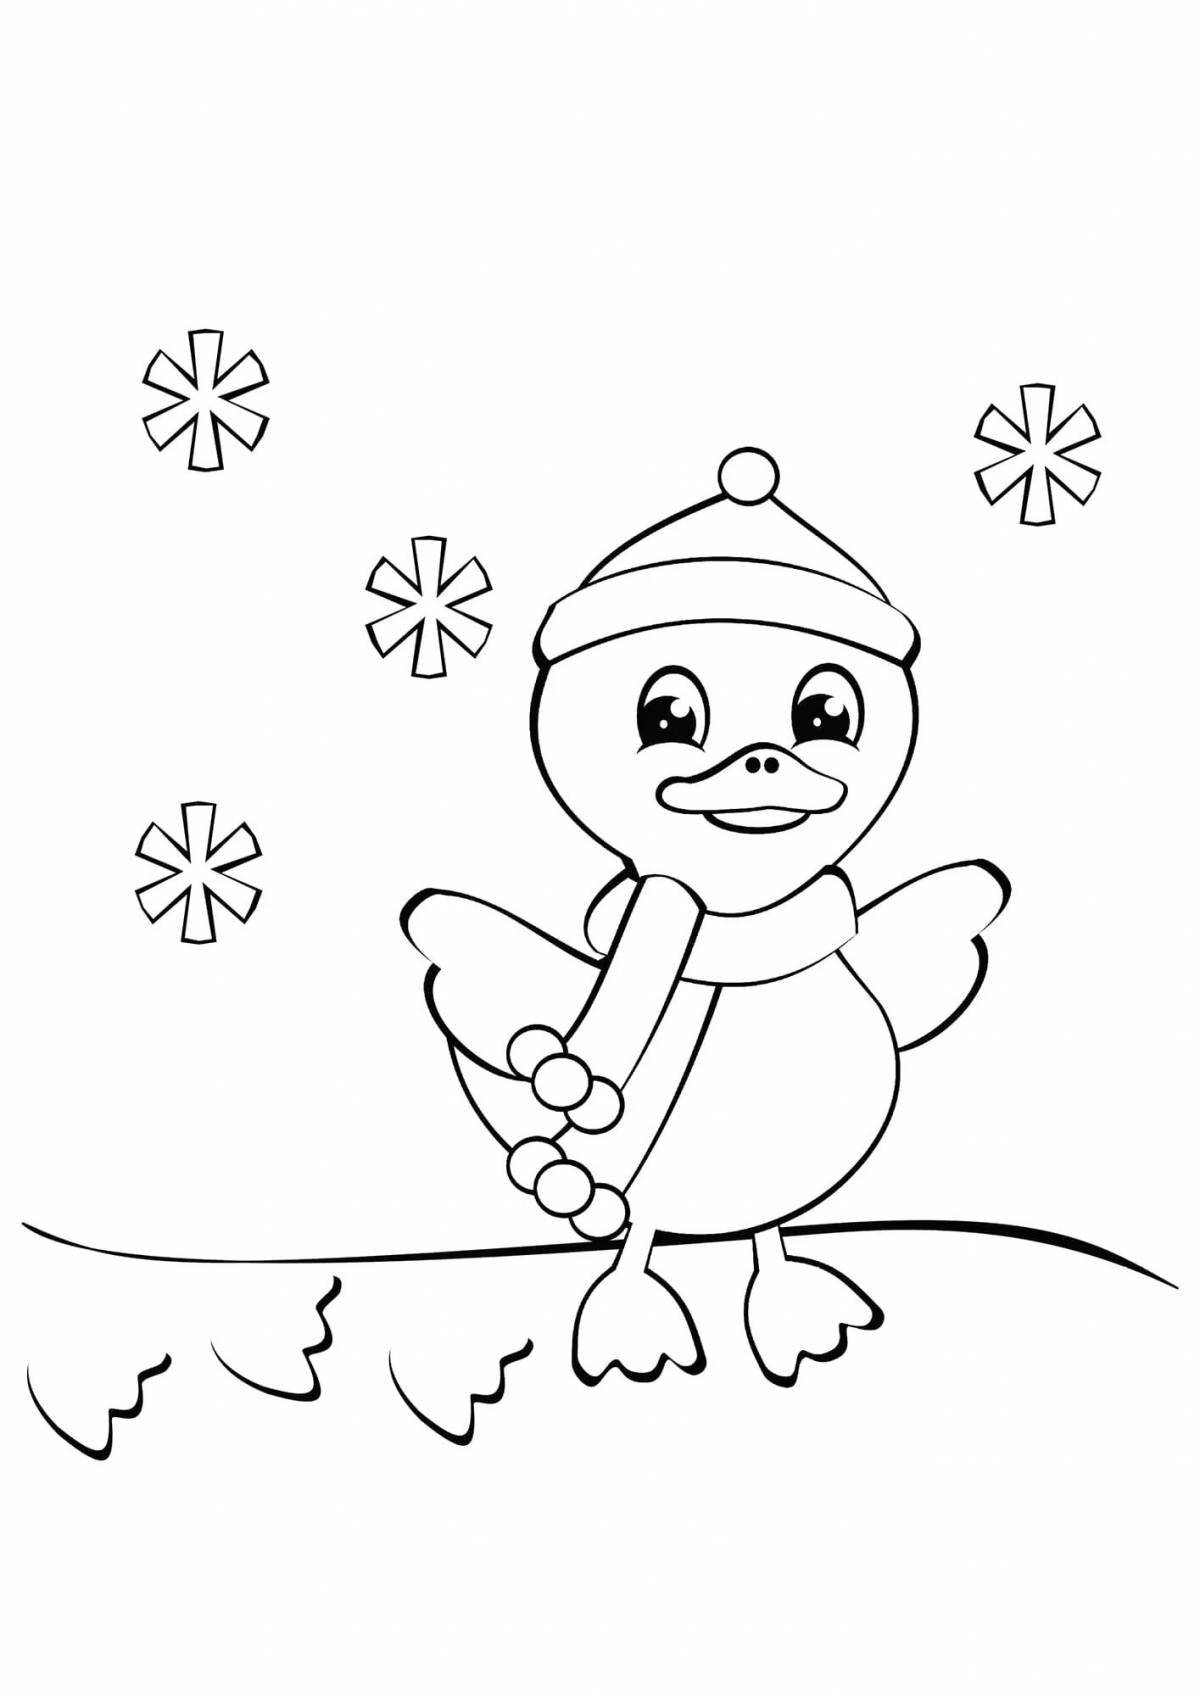 Merry winter coloring book for 4 year olds